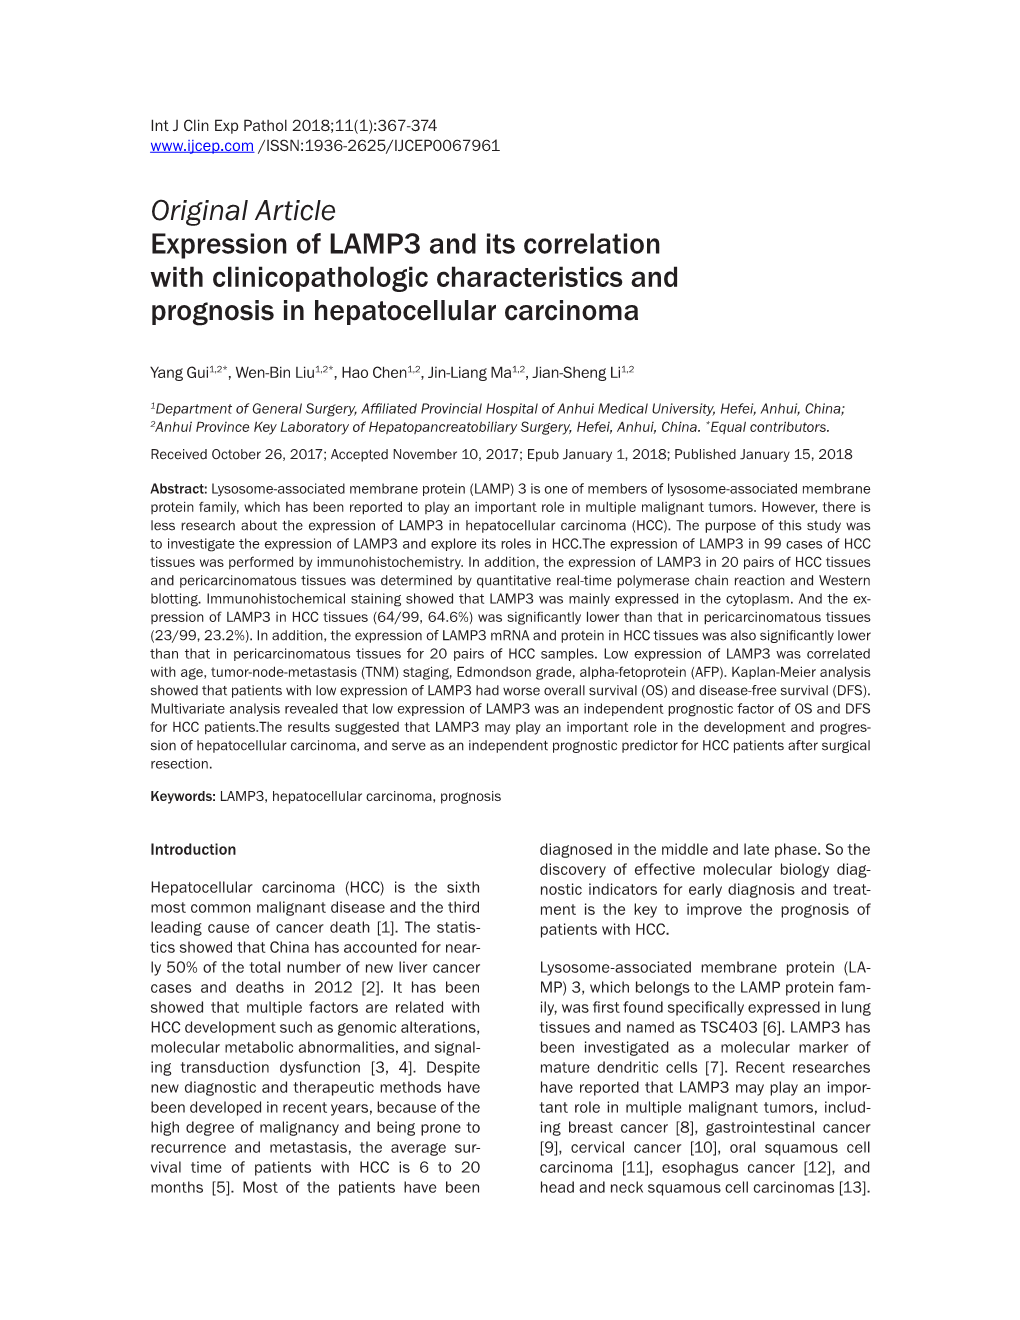 Original Article Expression of LAMP3 and Its Correlation with Clinicopathologic Characteristics and Prognosis in Hepatocellular Carcinoma